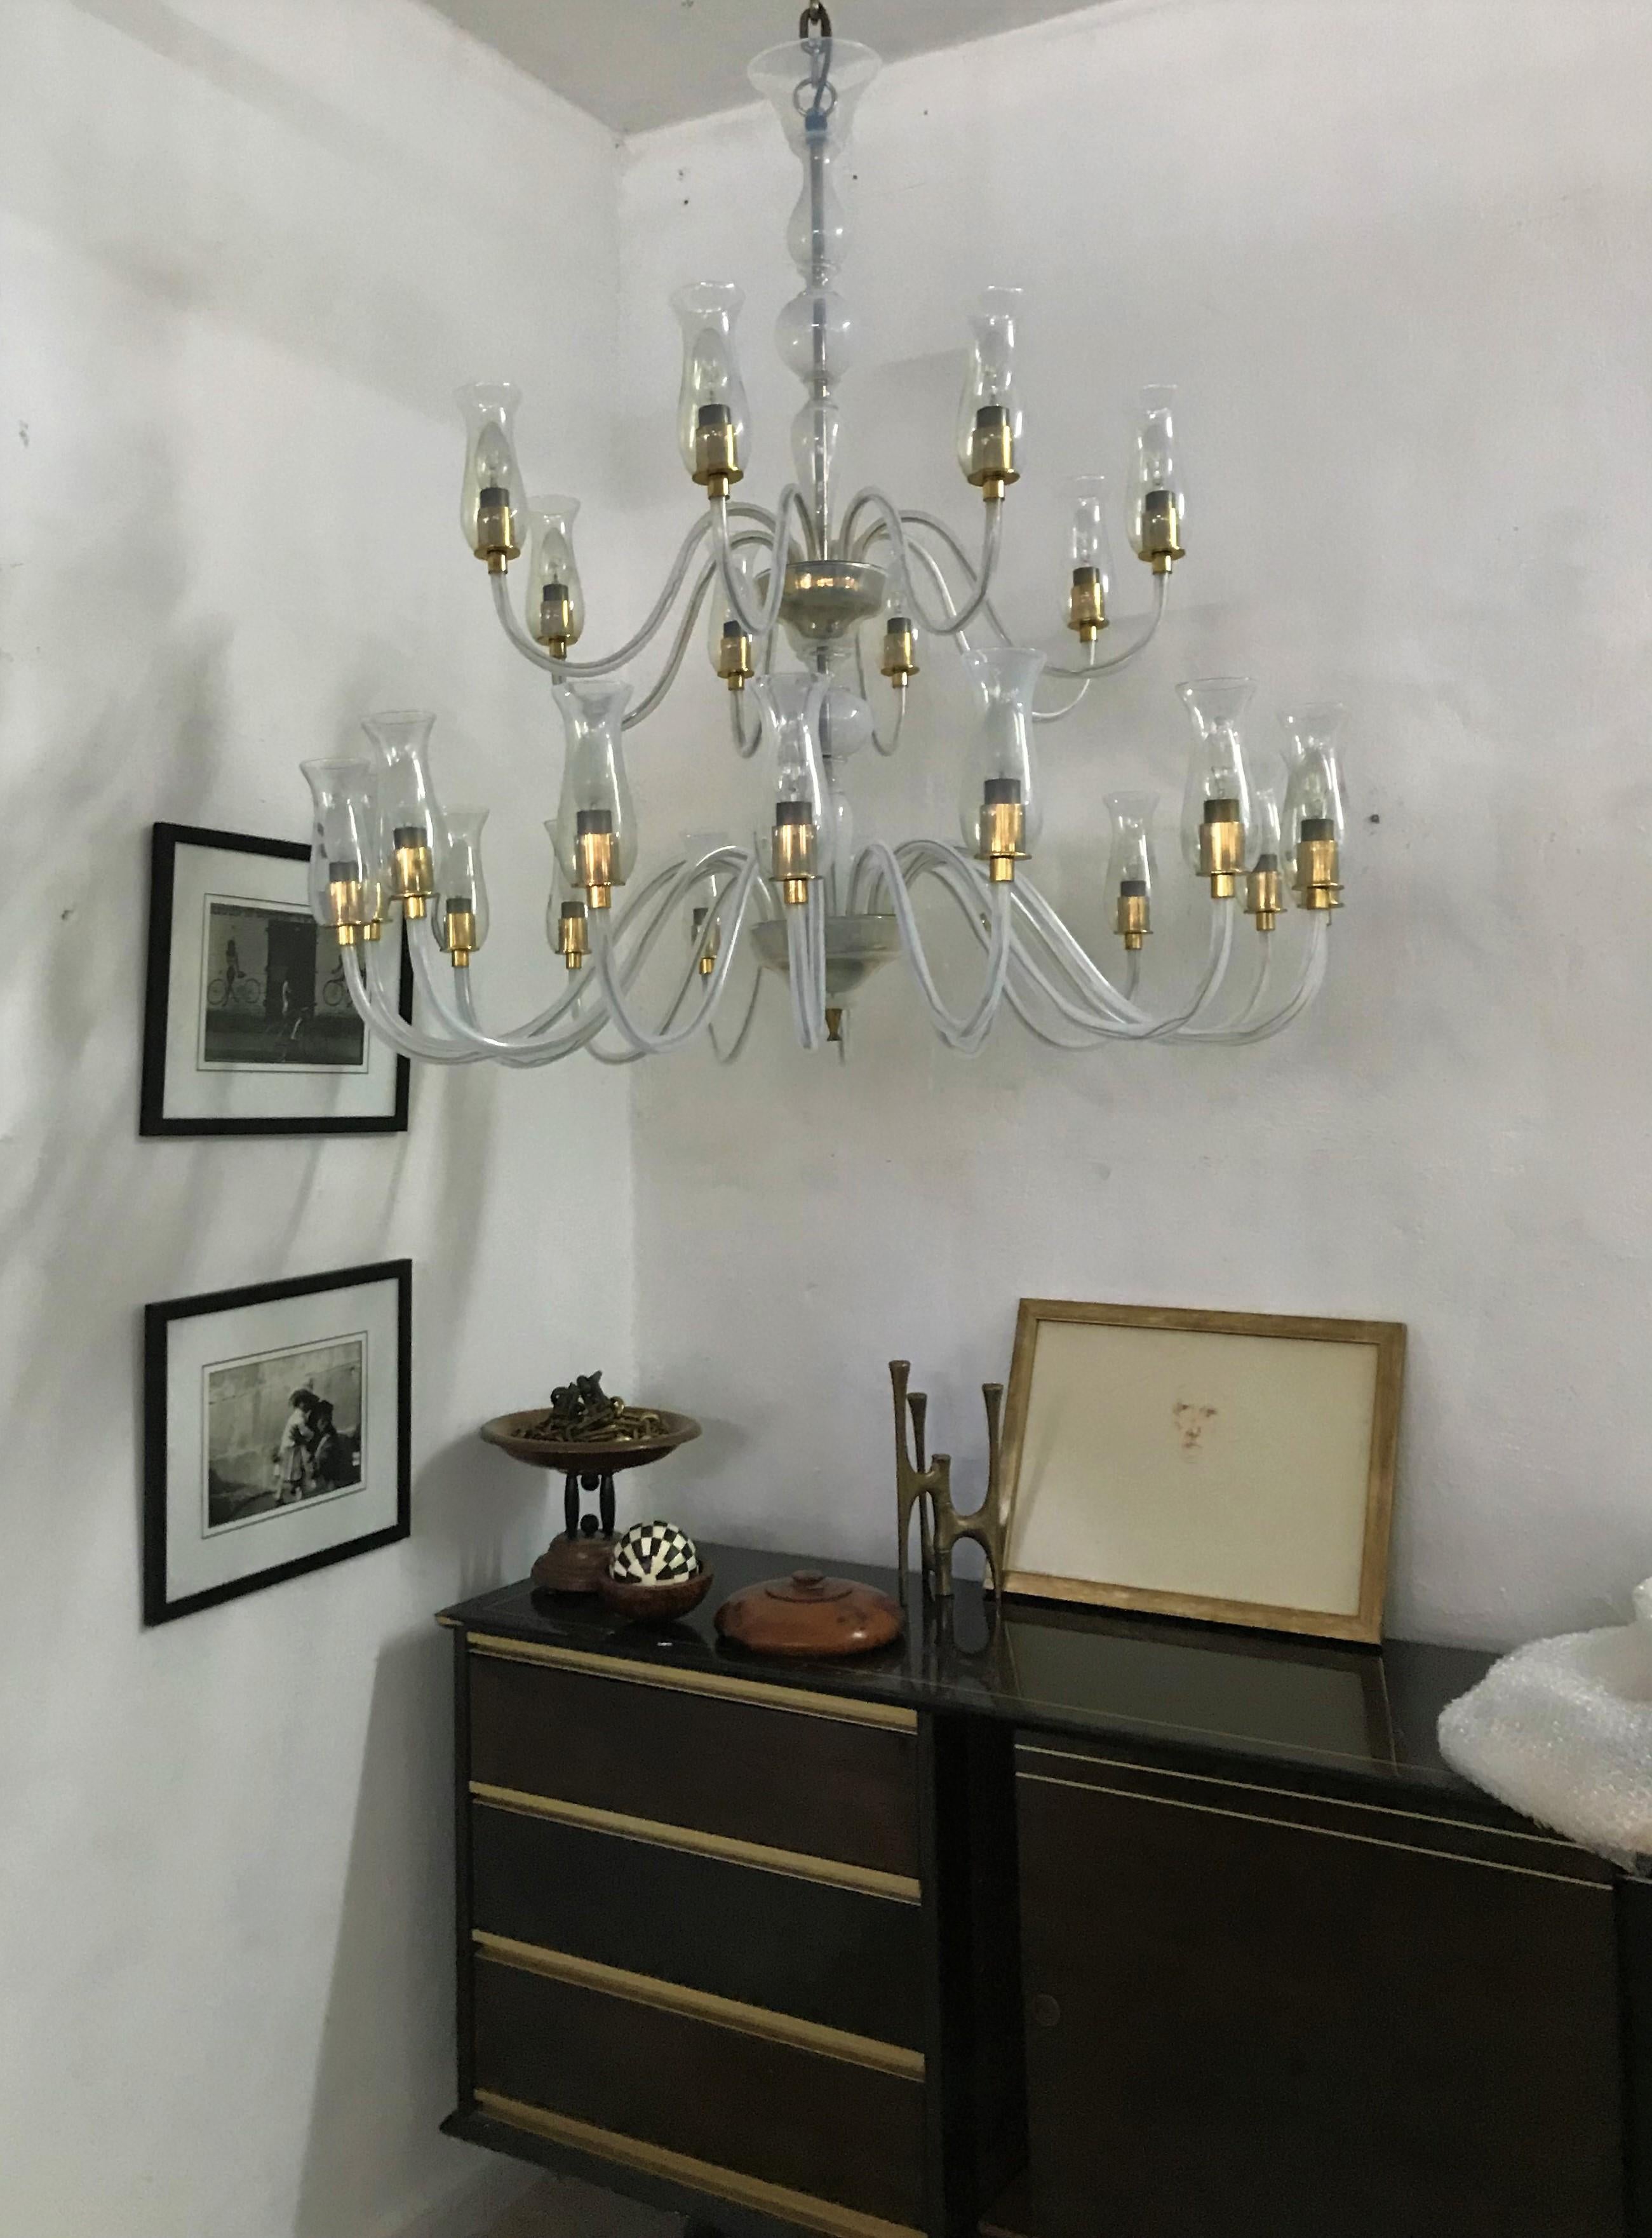 24-Light Mid Century Modern Chandelier by Cenedese in Murano Glass, circa 1970 In Good Condition For Sale In Merida, Yucatan